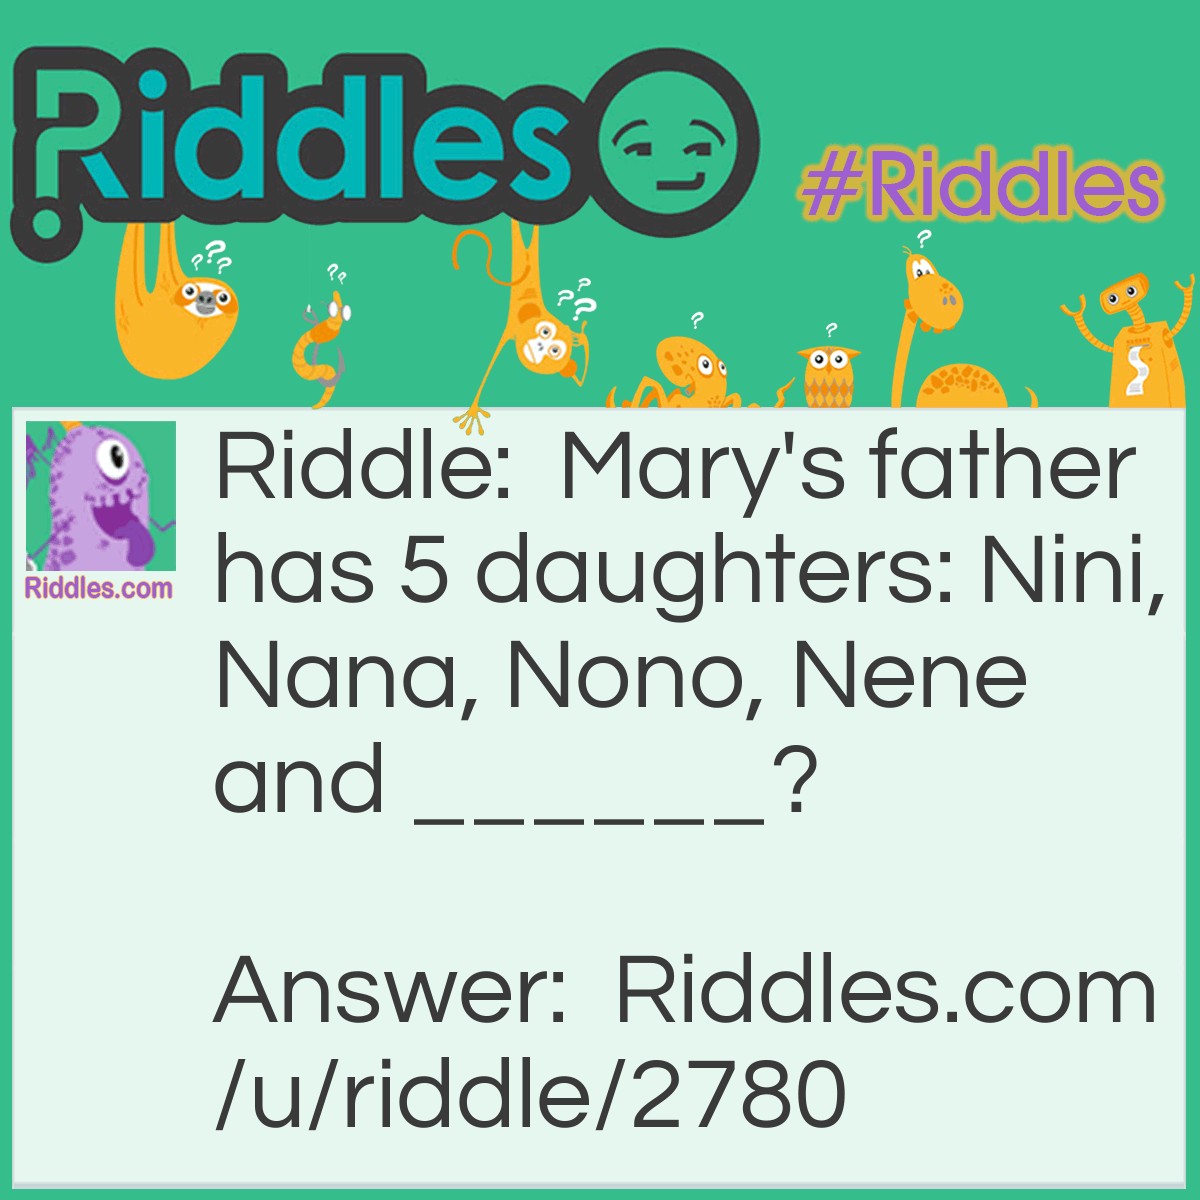 Riddle: Mary's father has 5 daughters: Nini, Nana, Nono, Nene and ______? Answer: Mary.